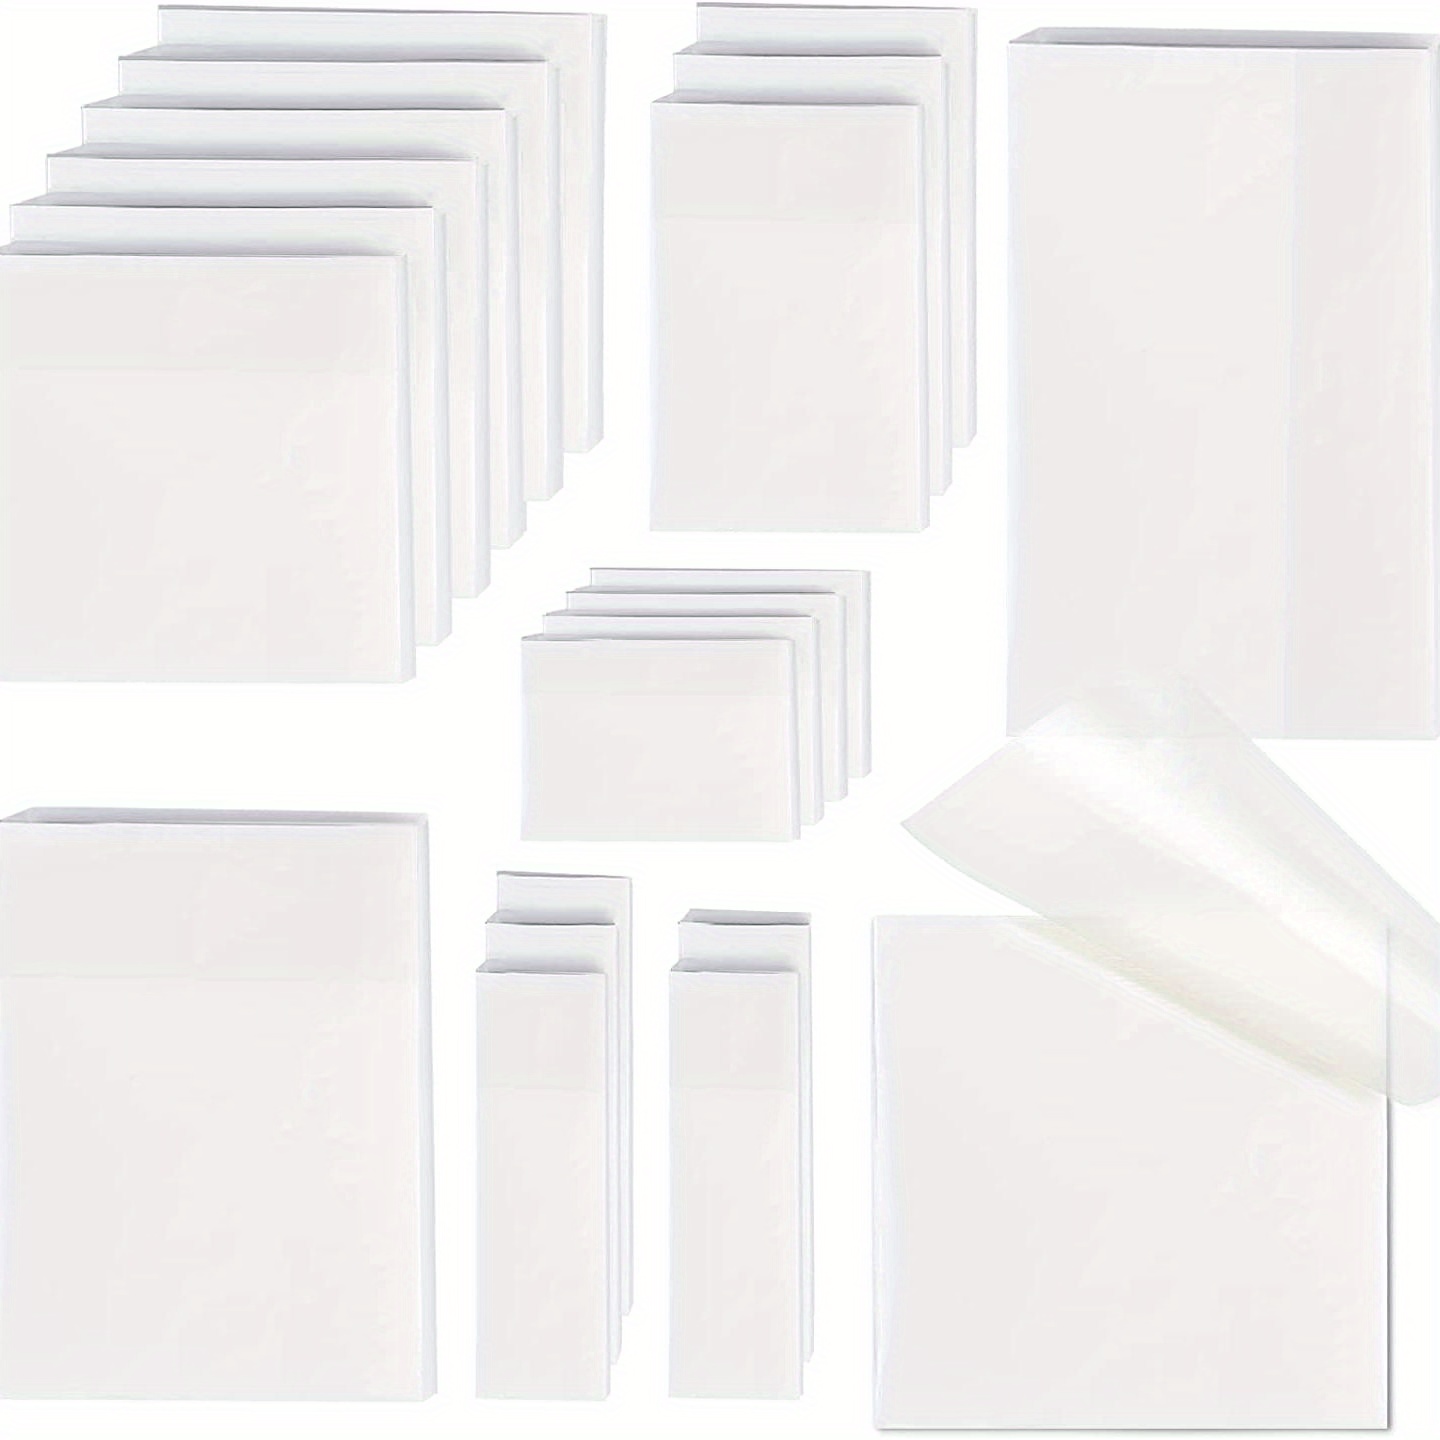 Transparent Sticky Notes 10 Pack, WeGuard 6 Pads Color Sticky Notes+4 Pads  White Sticky Notes for Memo, Mark, Tab, Removable Used to Call Attention to